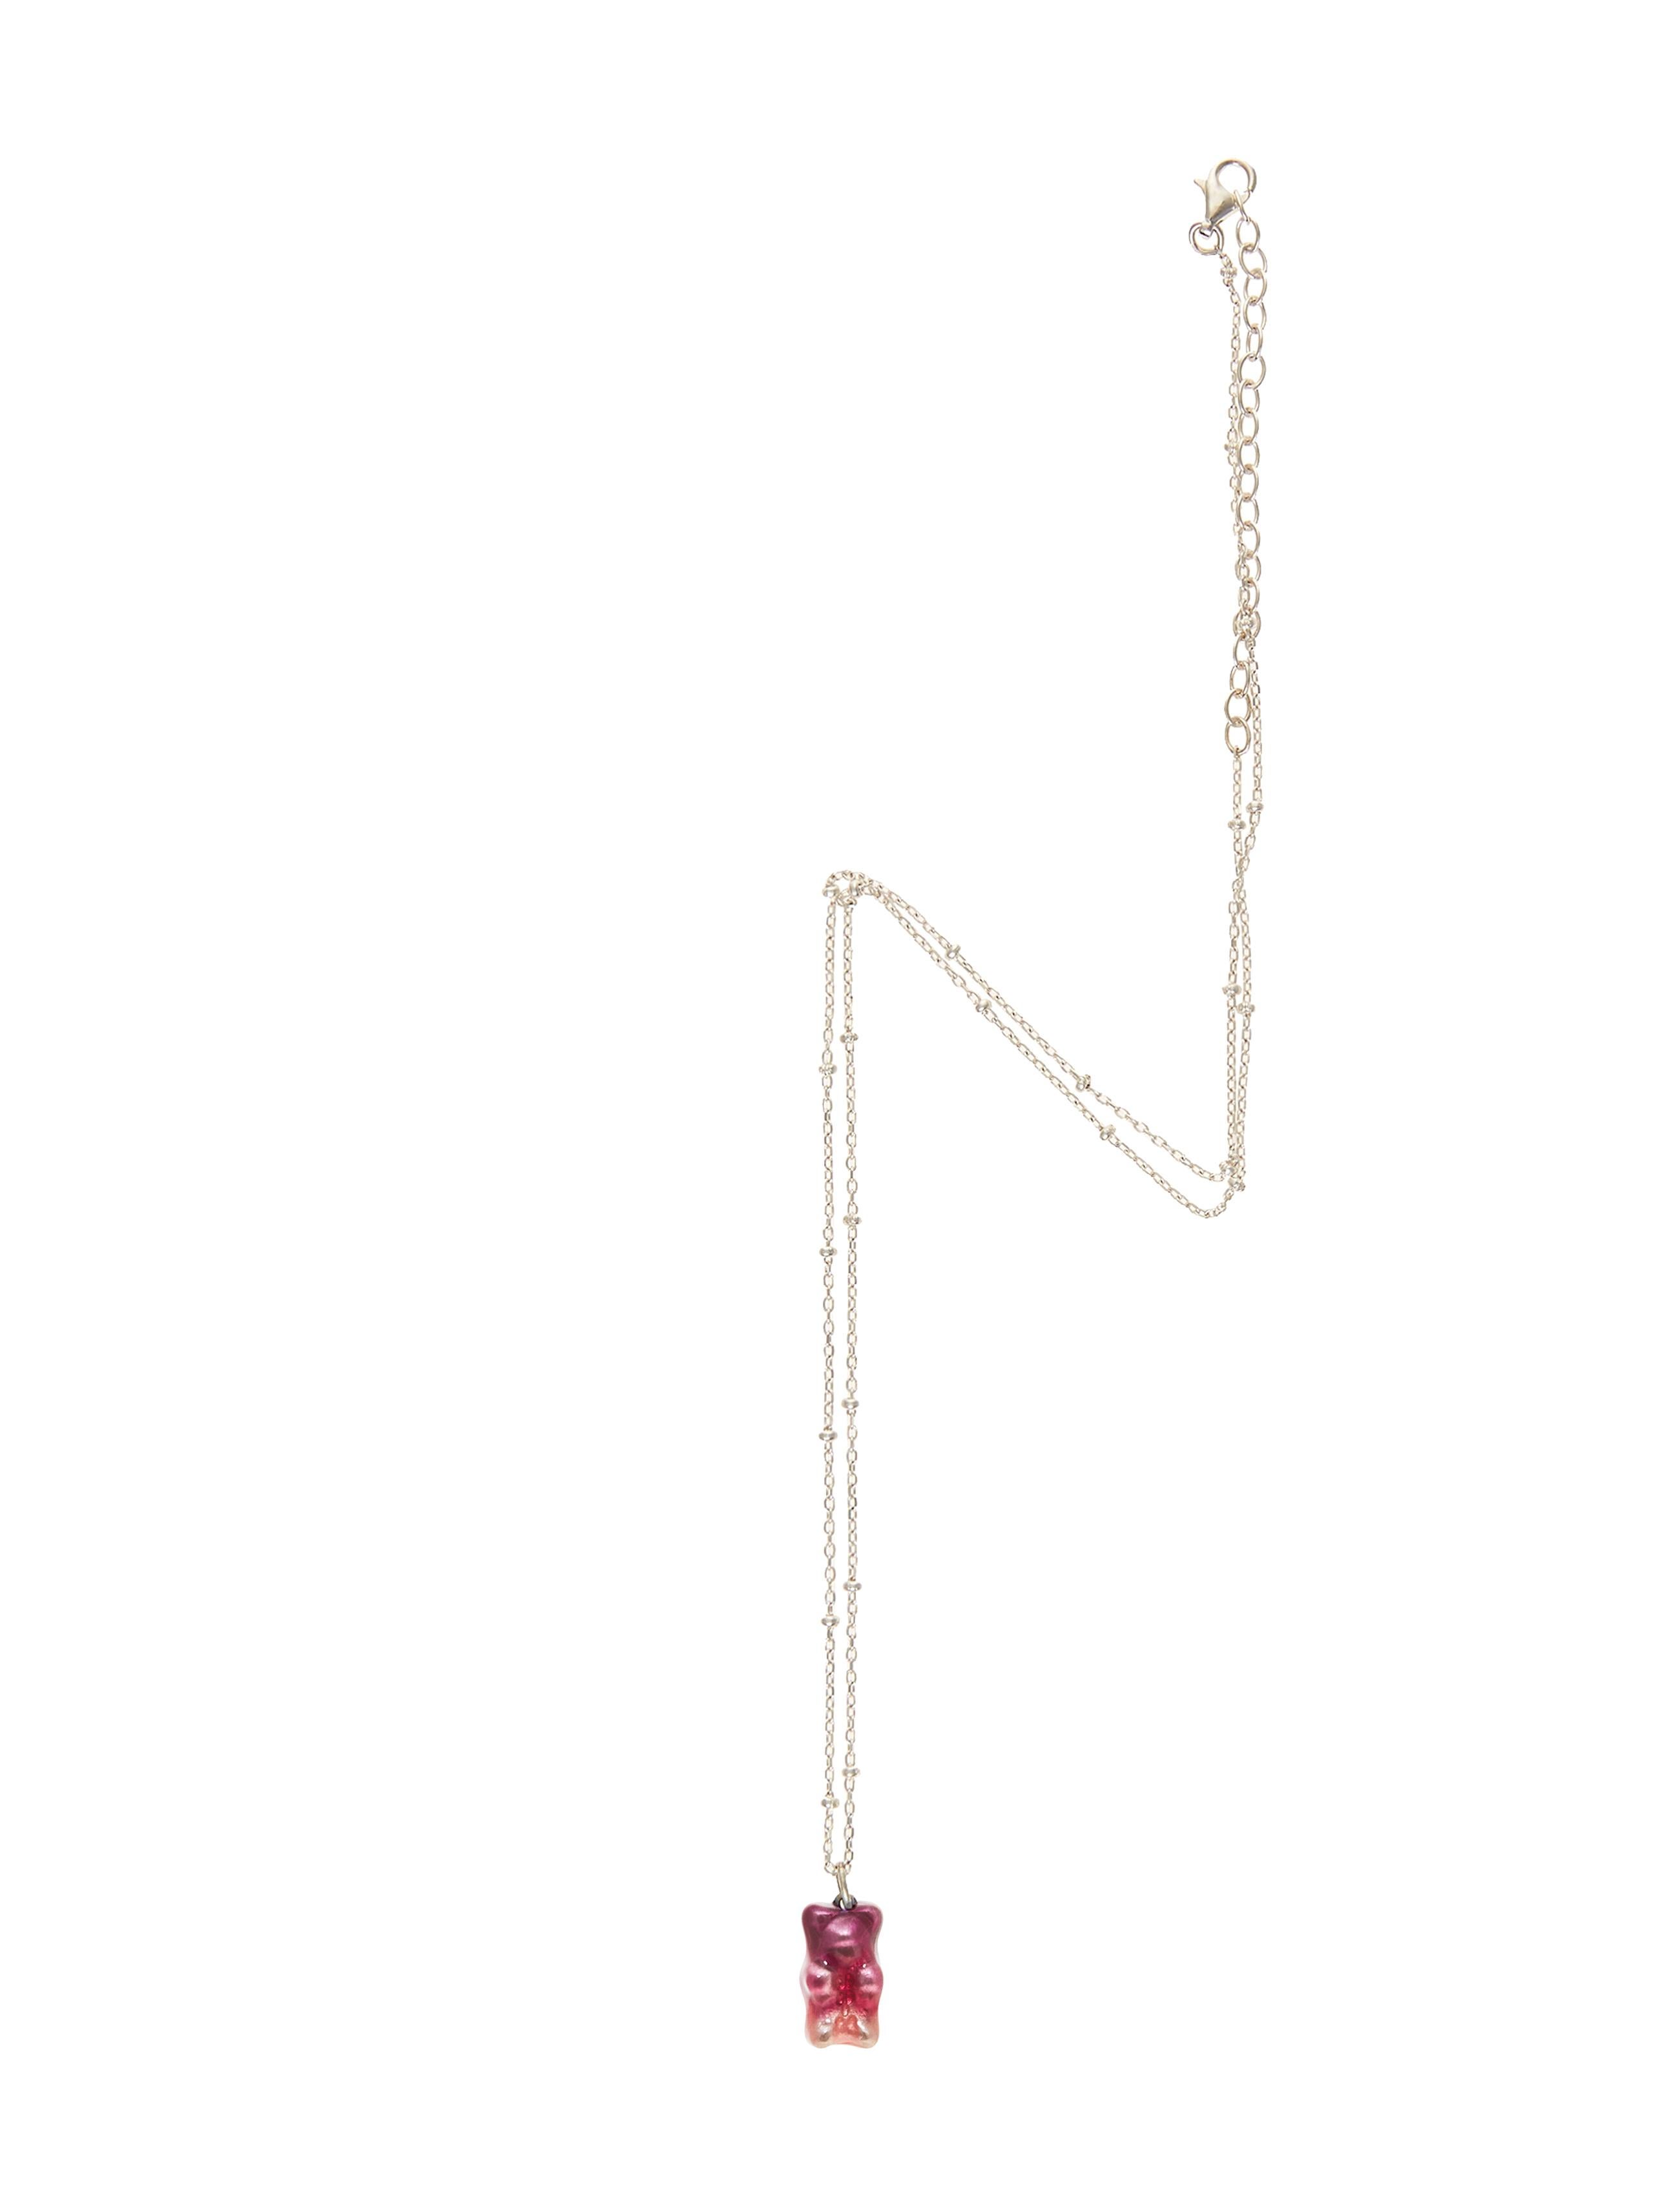  925 sterling silver gummy bear pendant for kids  on silver gold plated  chain with transparent ombre plum  enamel coverage. 

The Gummy Project by Maggoosh is a capsule collection inspired by the designer's life in New York City and her passion for